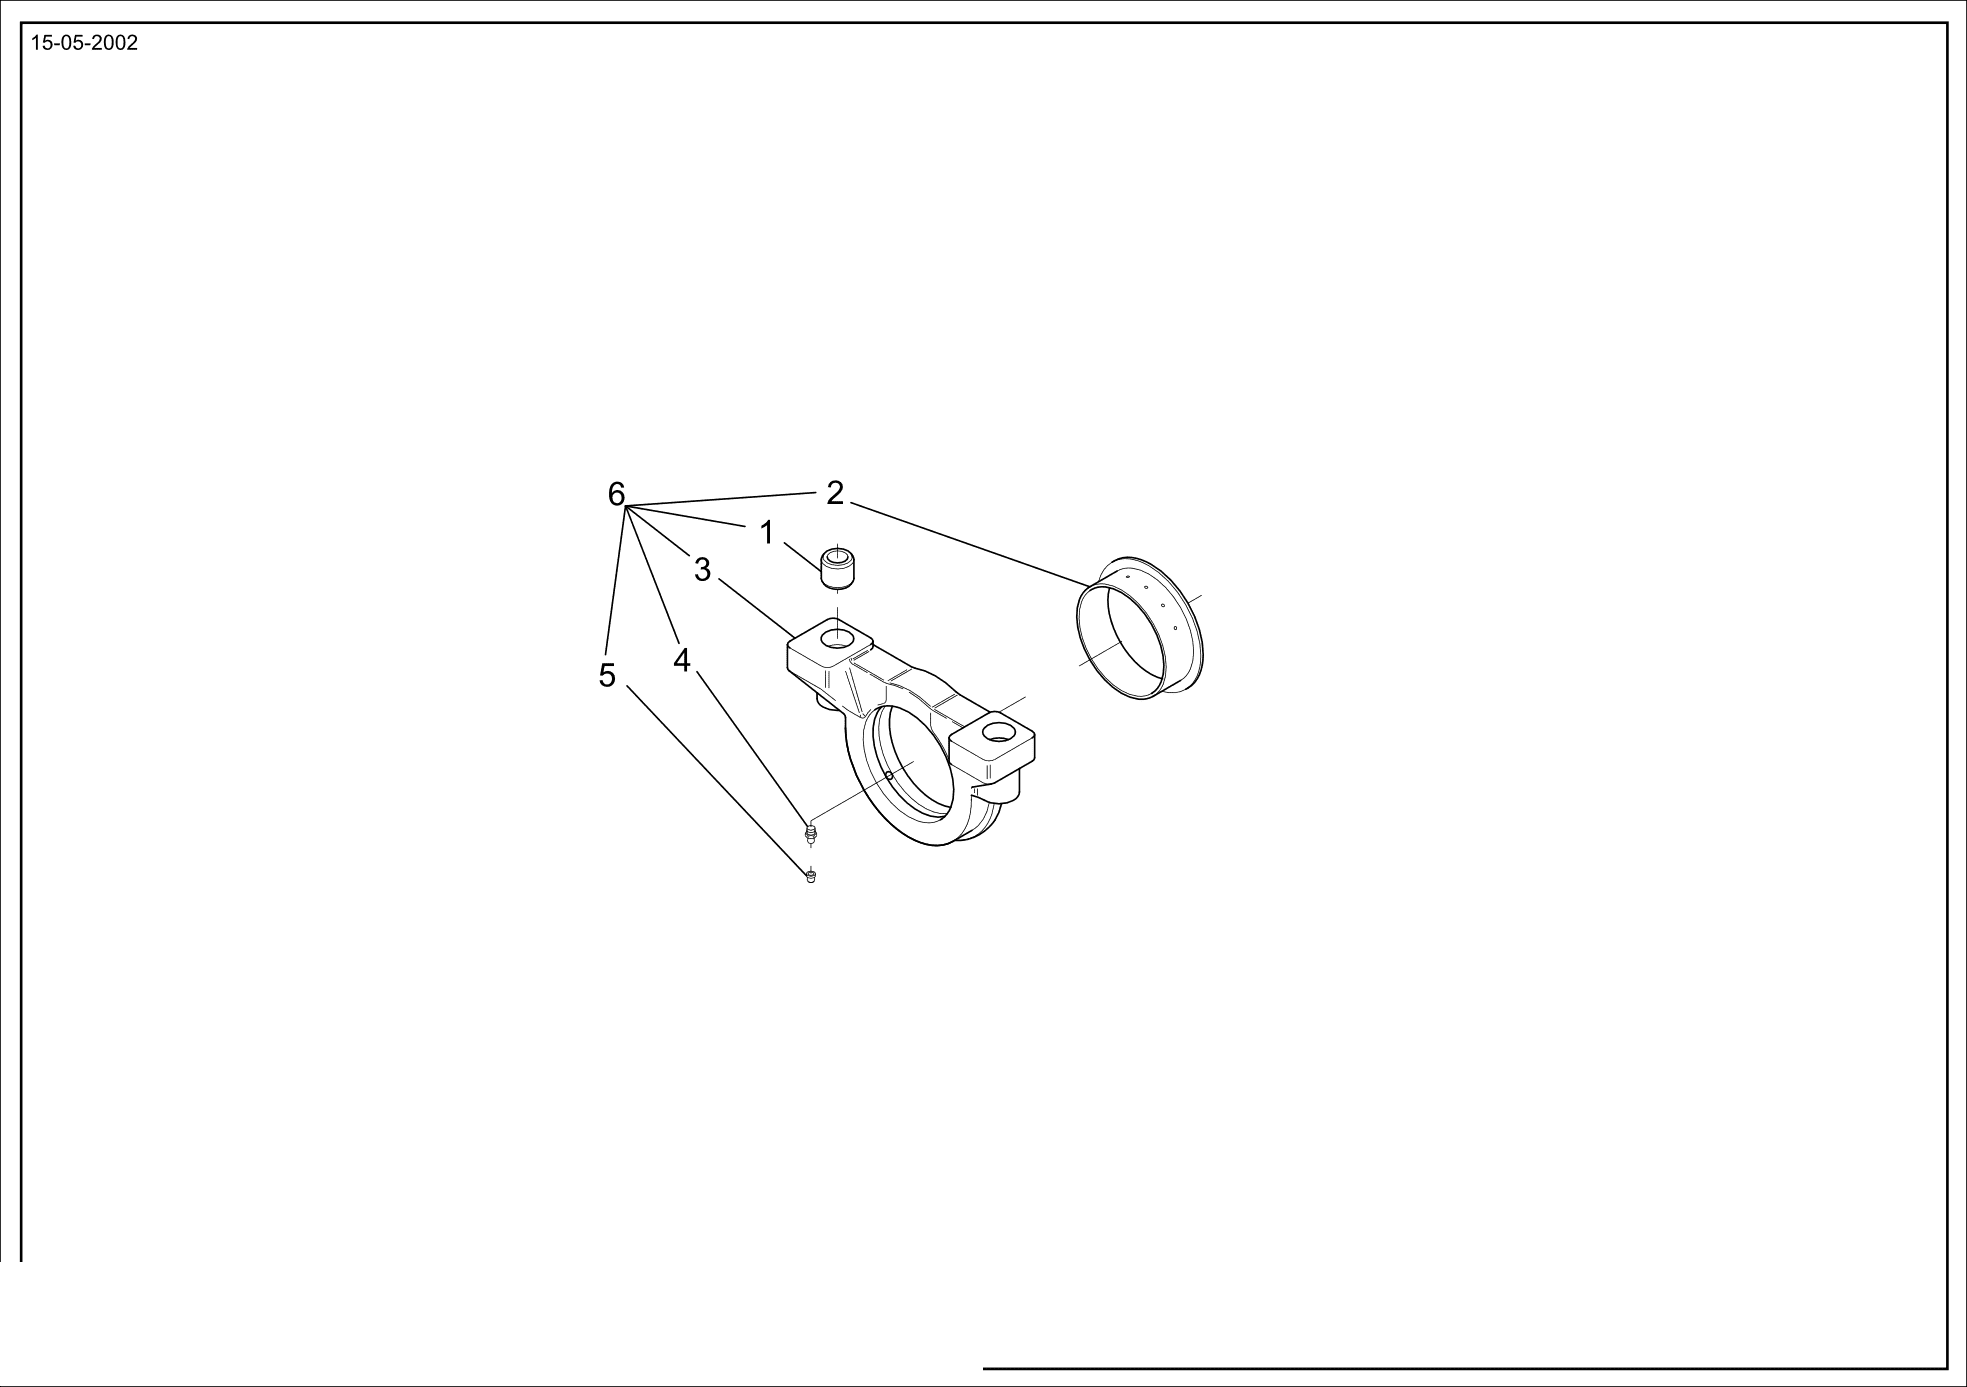 drawing for MERLO 048787 - SUPPORT (figure 4)